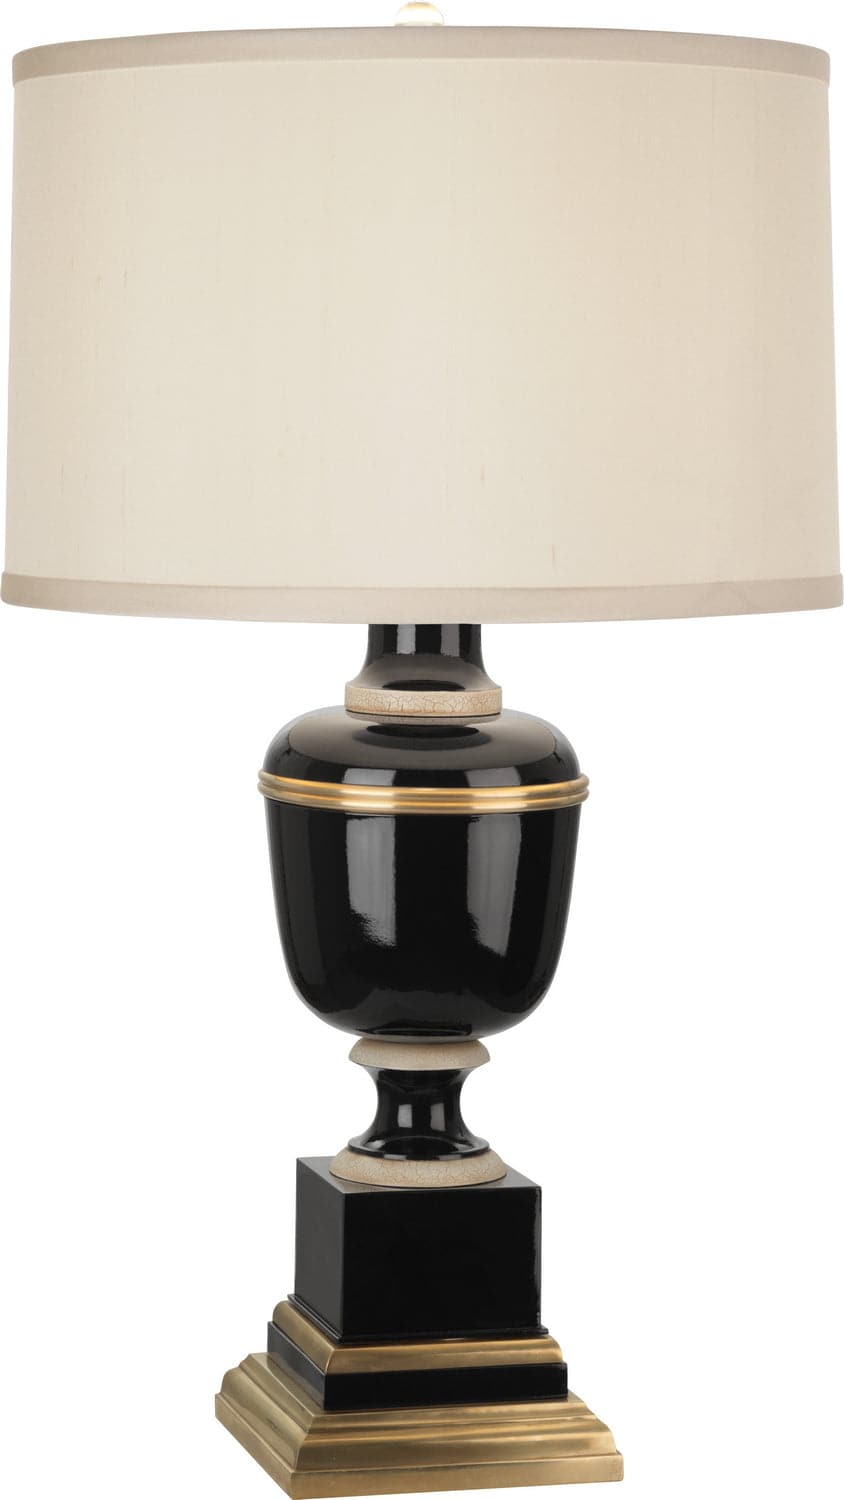 Robert Abbey - 2507X - One Light Accent Lamp - Annika - Black Lacquered Paint w/Natural Brass and Ivory Crackle